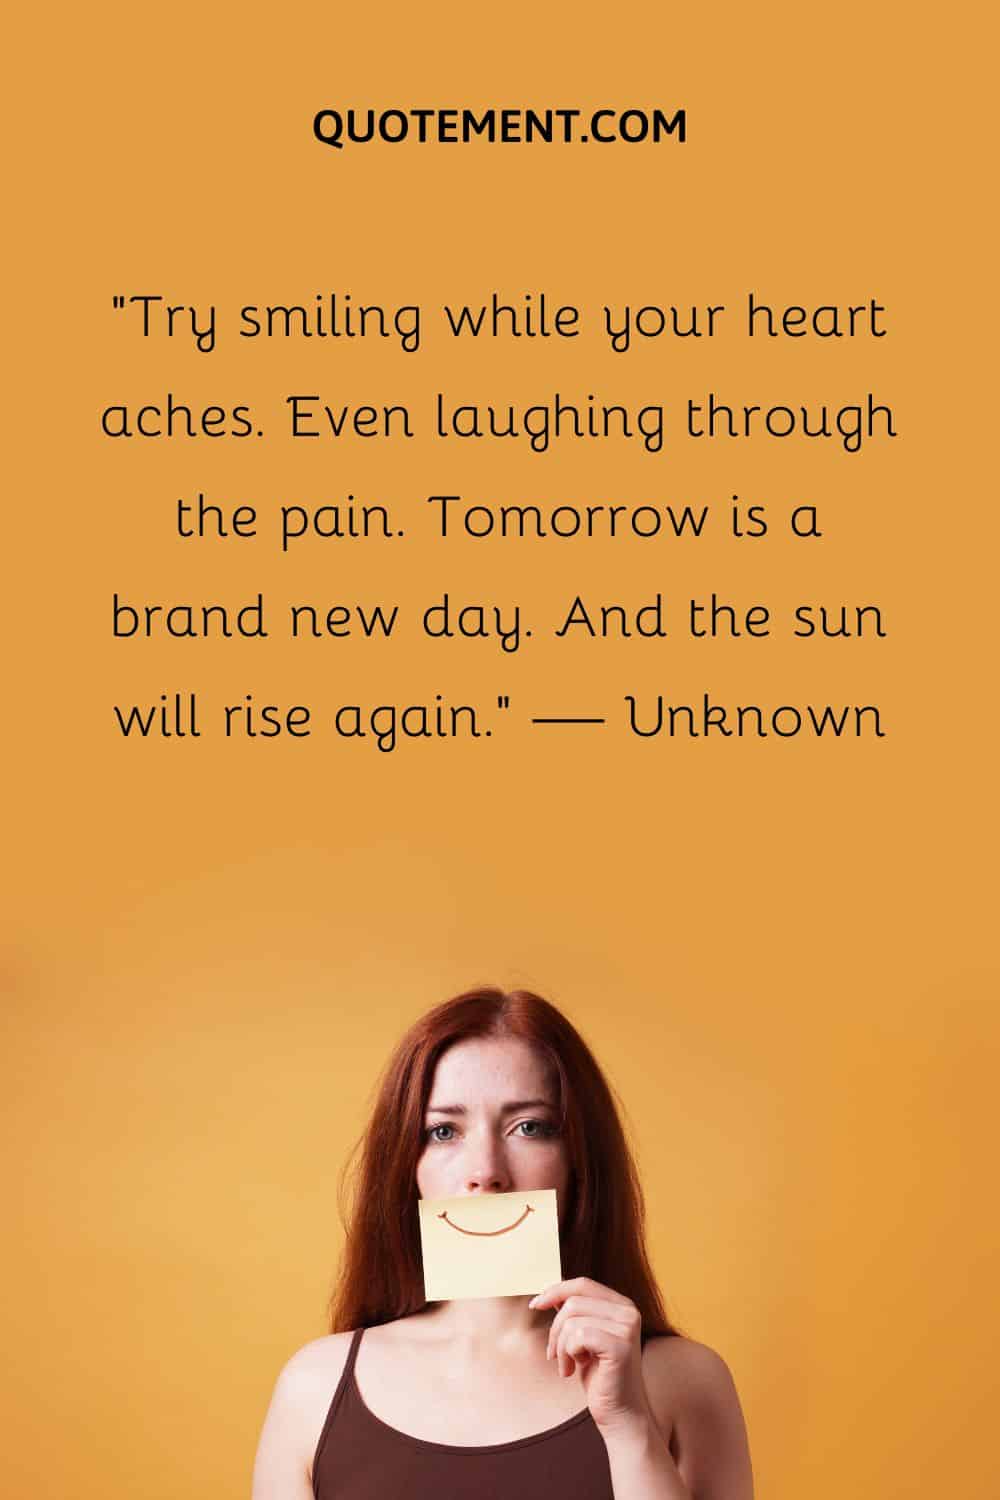 Try smiling while your heart aches.